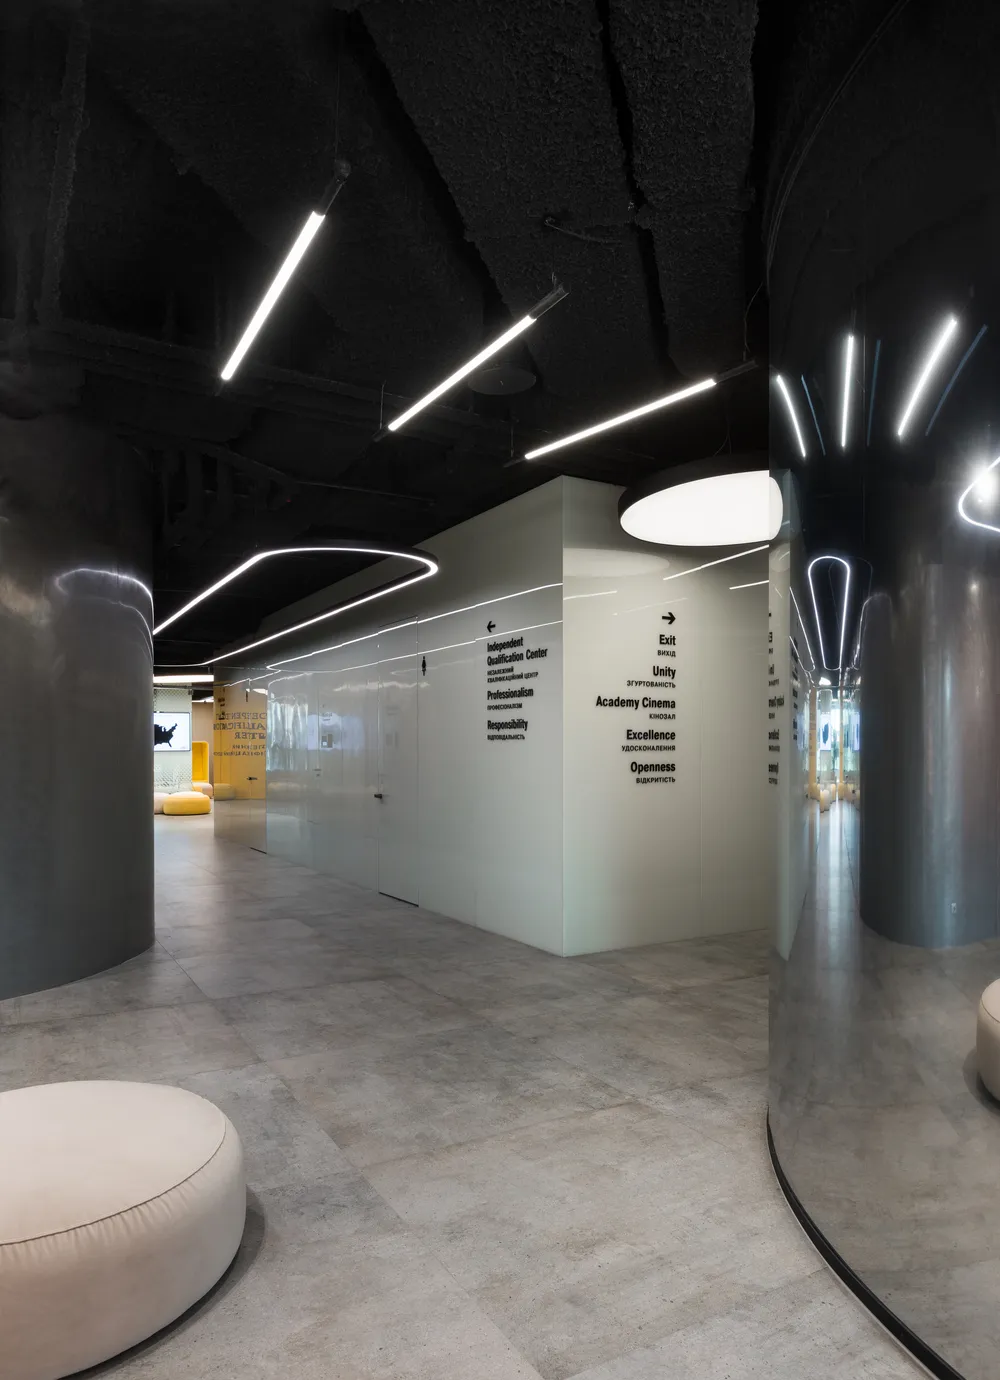 Image library / Academy DTEK, office